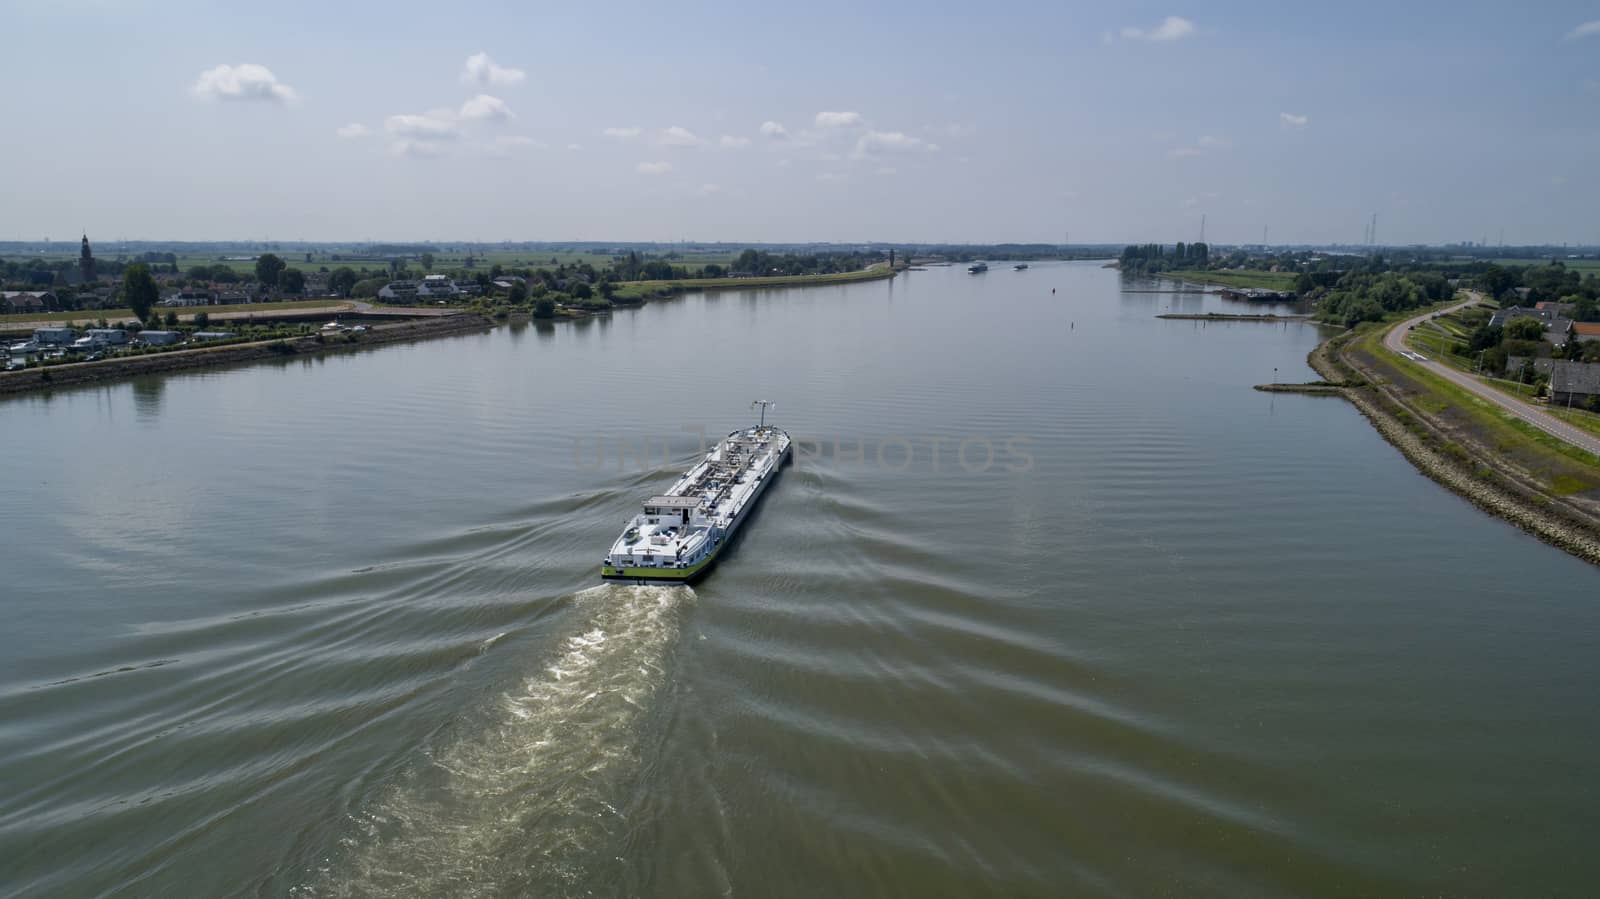 Aerial view:Barge with cargo on the river. River, cargo barge, highway with cars.. Cargo ship on the river